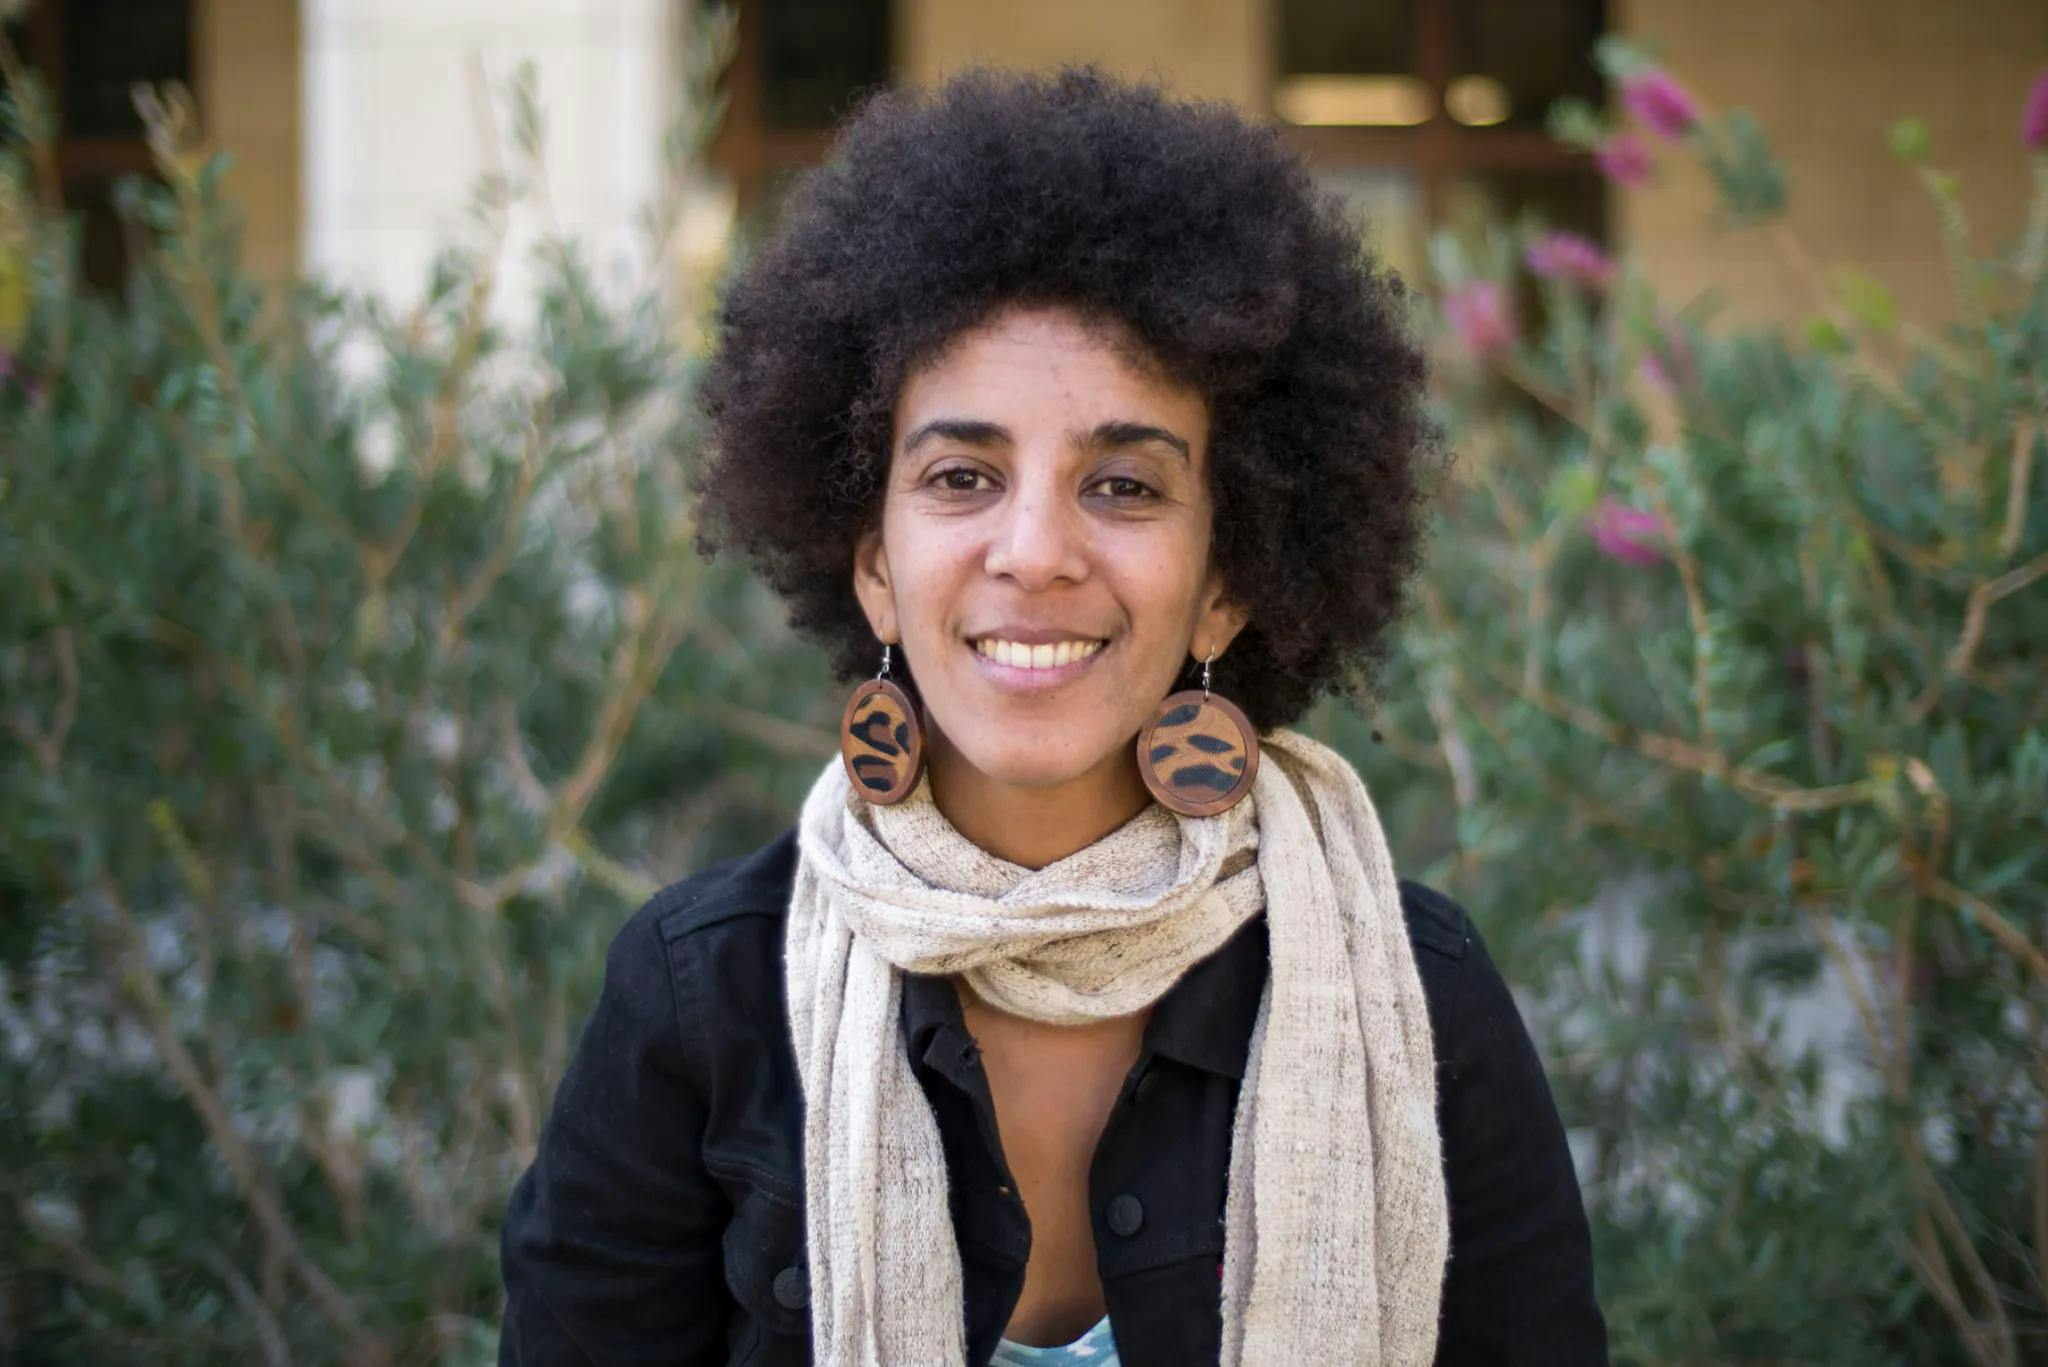 Headshot of Timnit Gebru, a Black woman with a medium-length afro hairstyle and large earrings. She is wearing a black long-sleeved top and a cream-colored scarf. She is outdoors, and there is a great deal of greenery behind her.